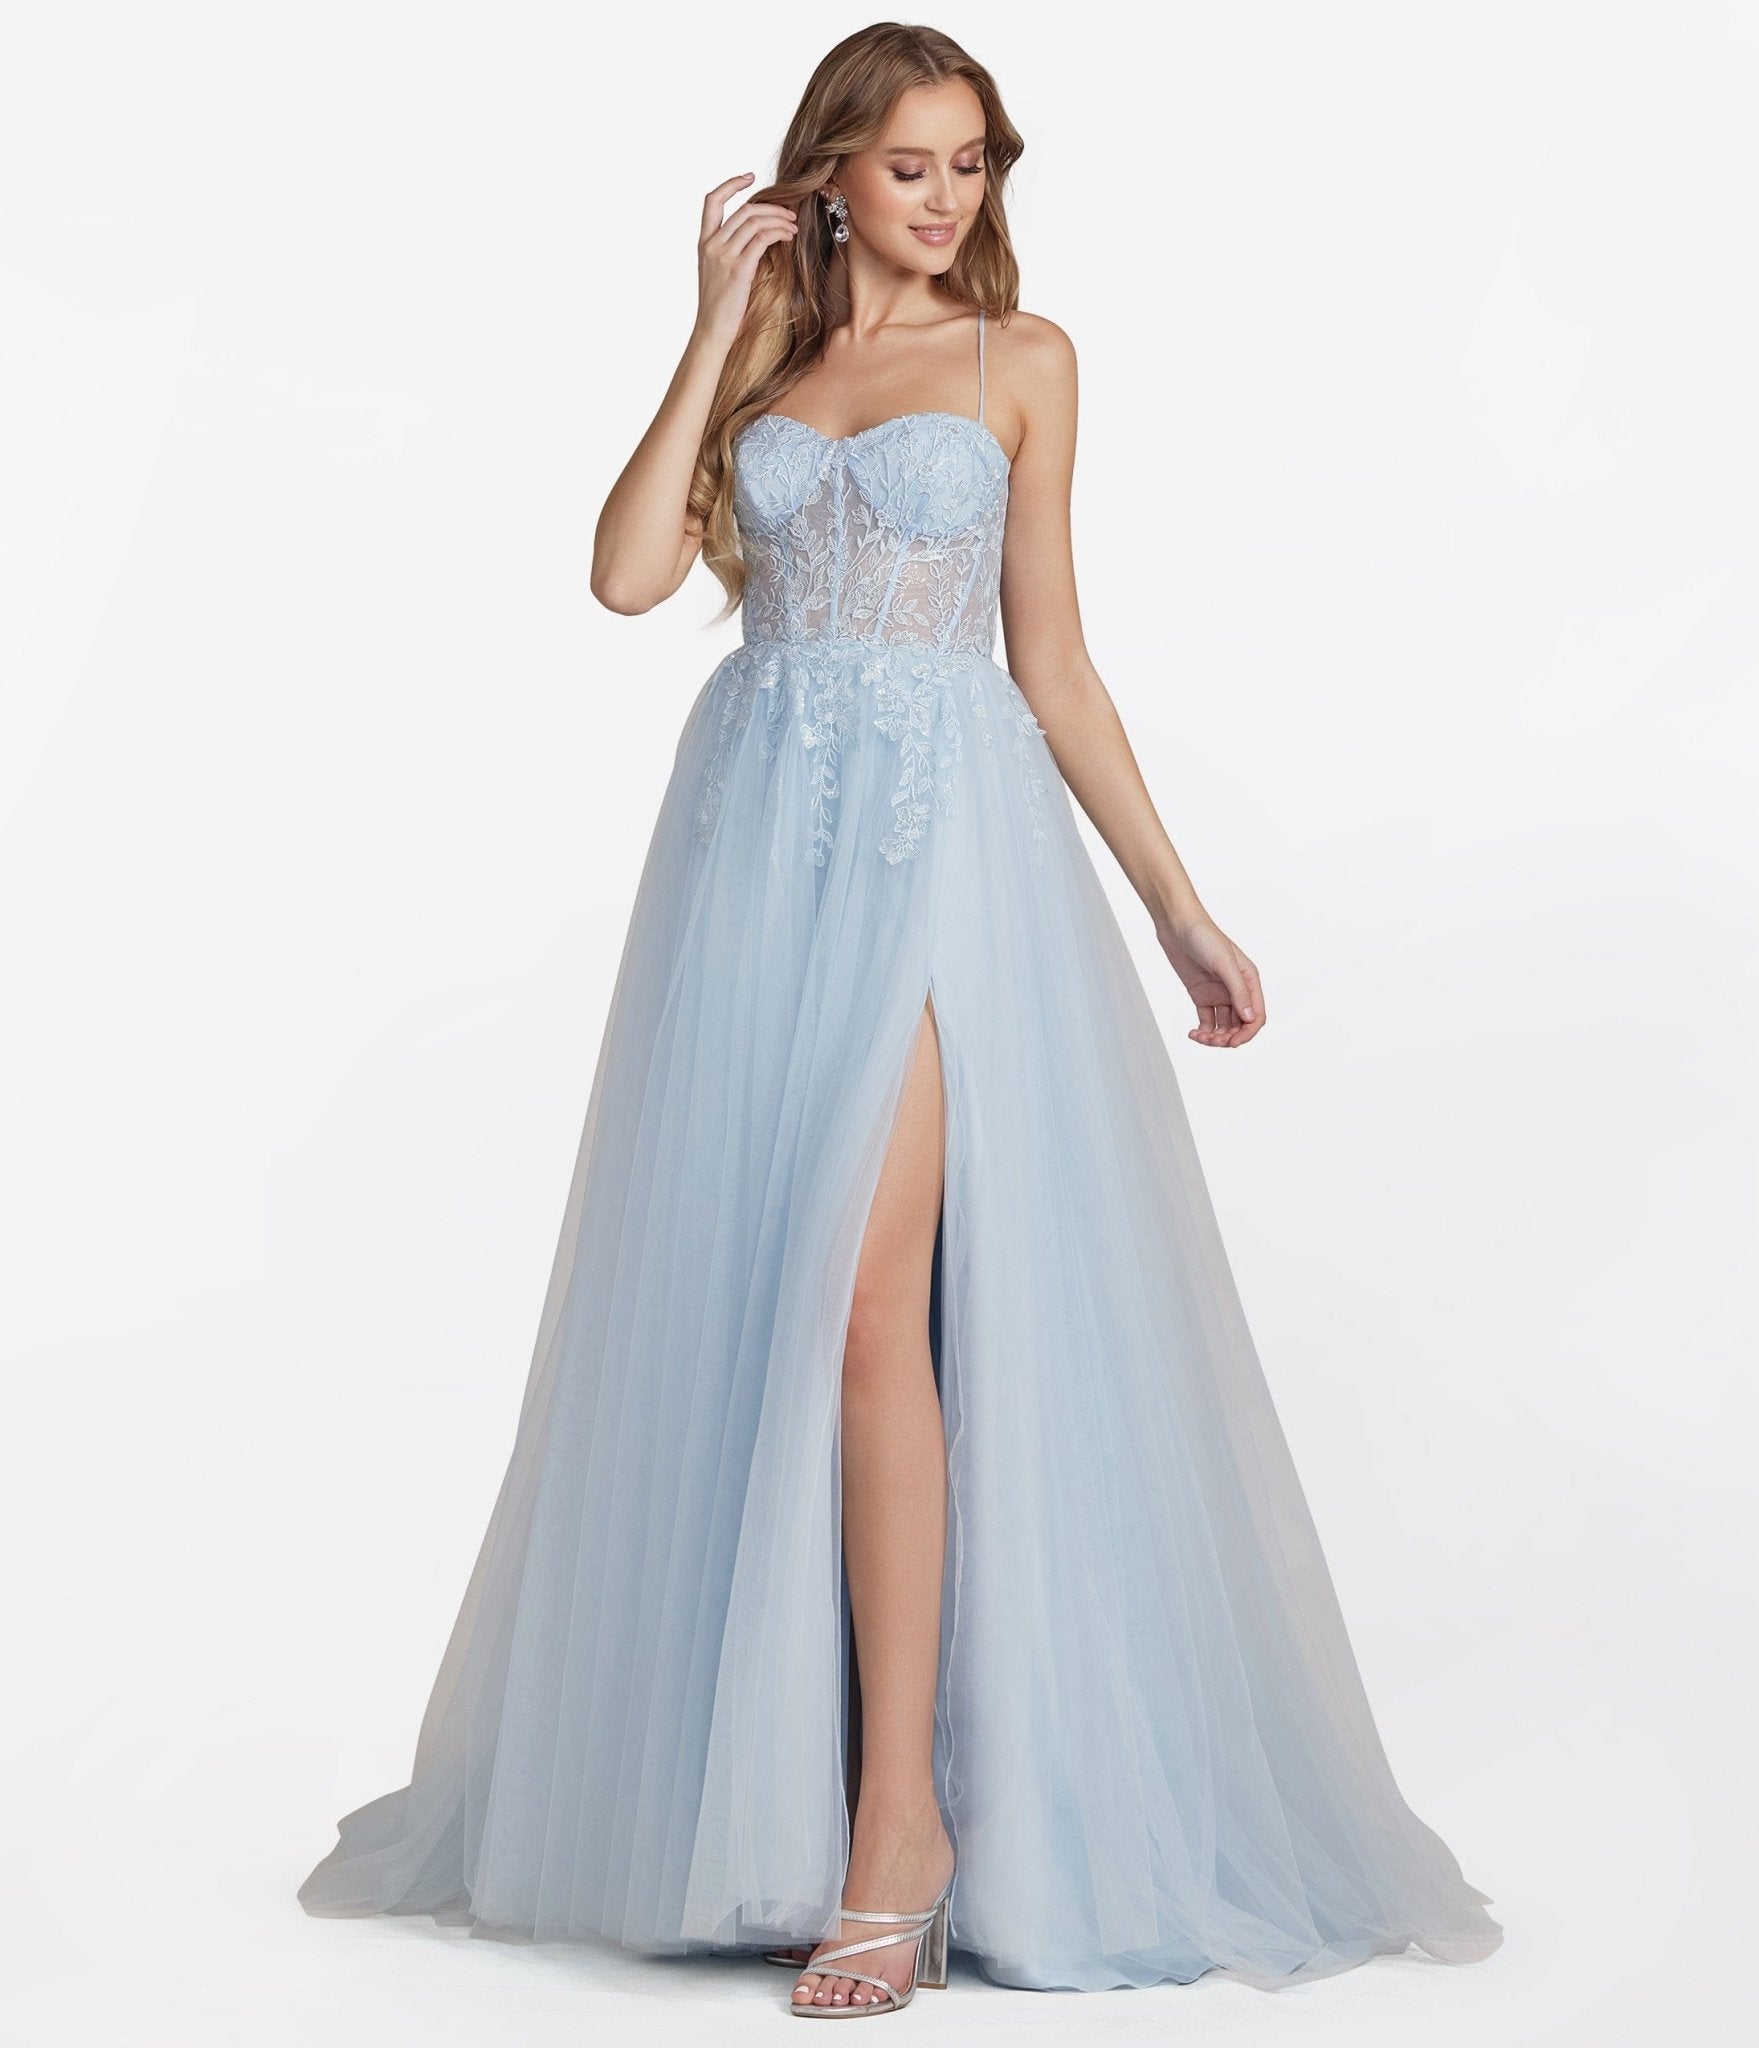 Glittering Frost Sequin Lace Ball Gown in Ice Blue and Pink -80512 –  Morteza Boutique L.A